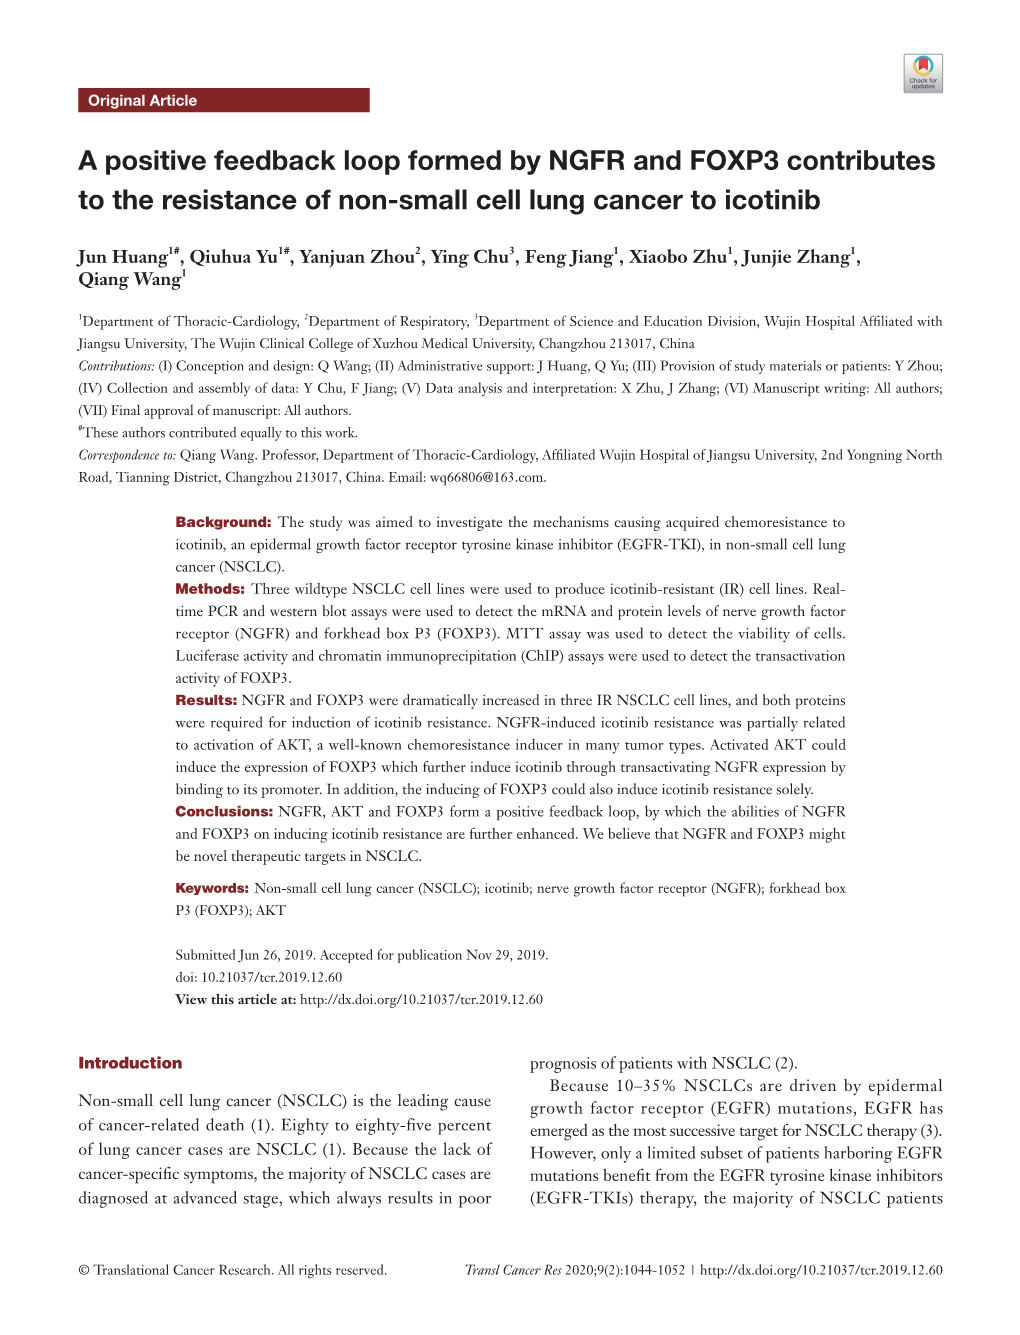 A Positive Feedback Loop Formed by NGFR and FOXP3 Contributes to the Resistance of Non-Small Cell Lung Cancer to Icotinib